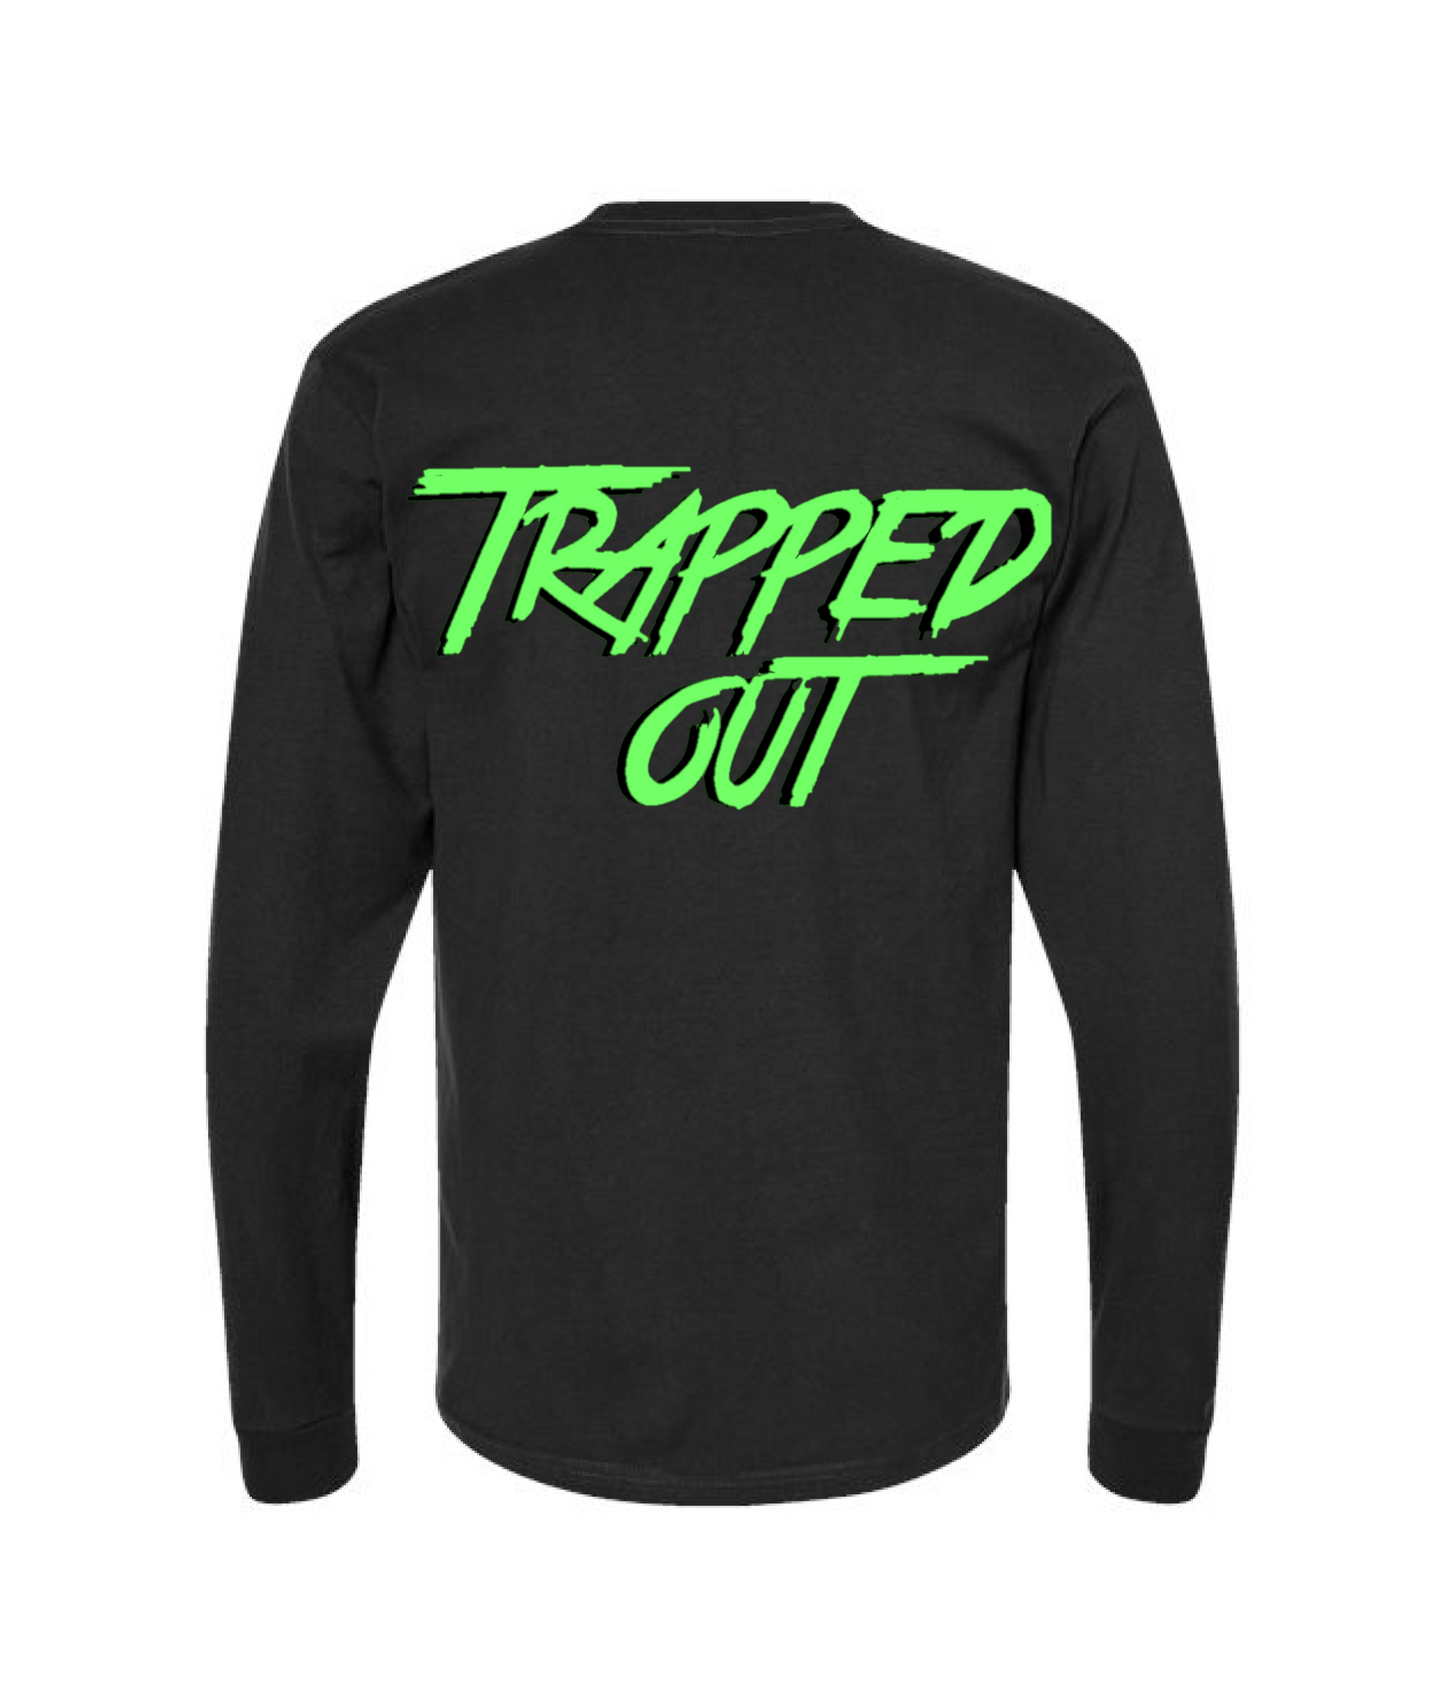 Secluded Trap - Secluded Trap - Black Long Sleeve T